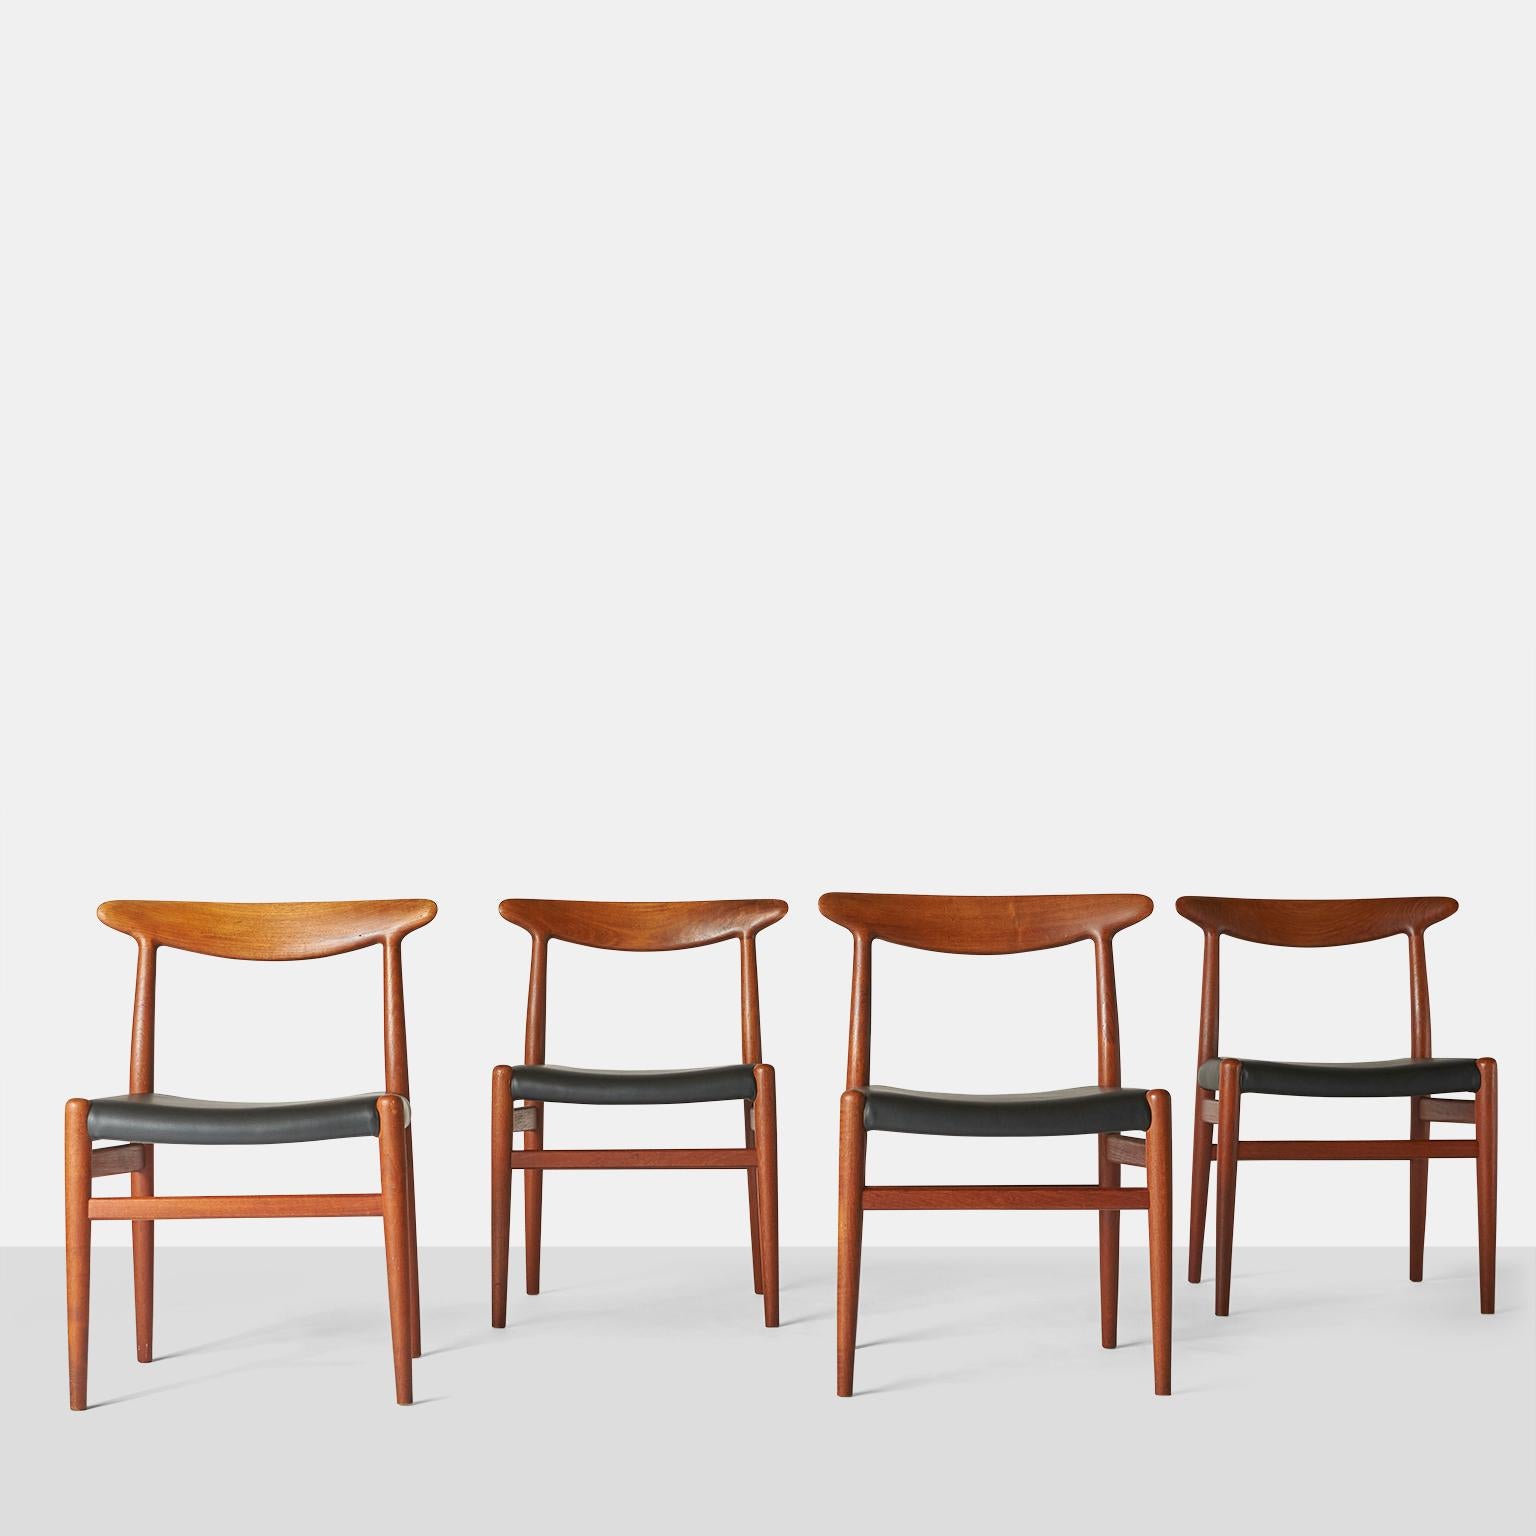 A set of four teak W2 dining chairs by Hans J. Wegner. Made for CM Madsen factory. Sometimes referred to as 